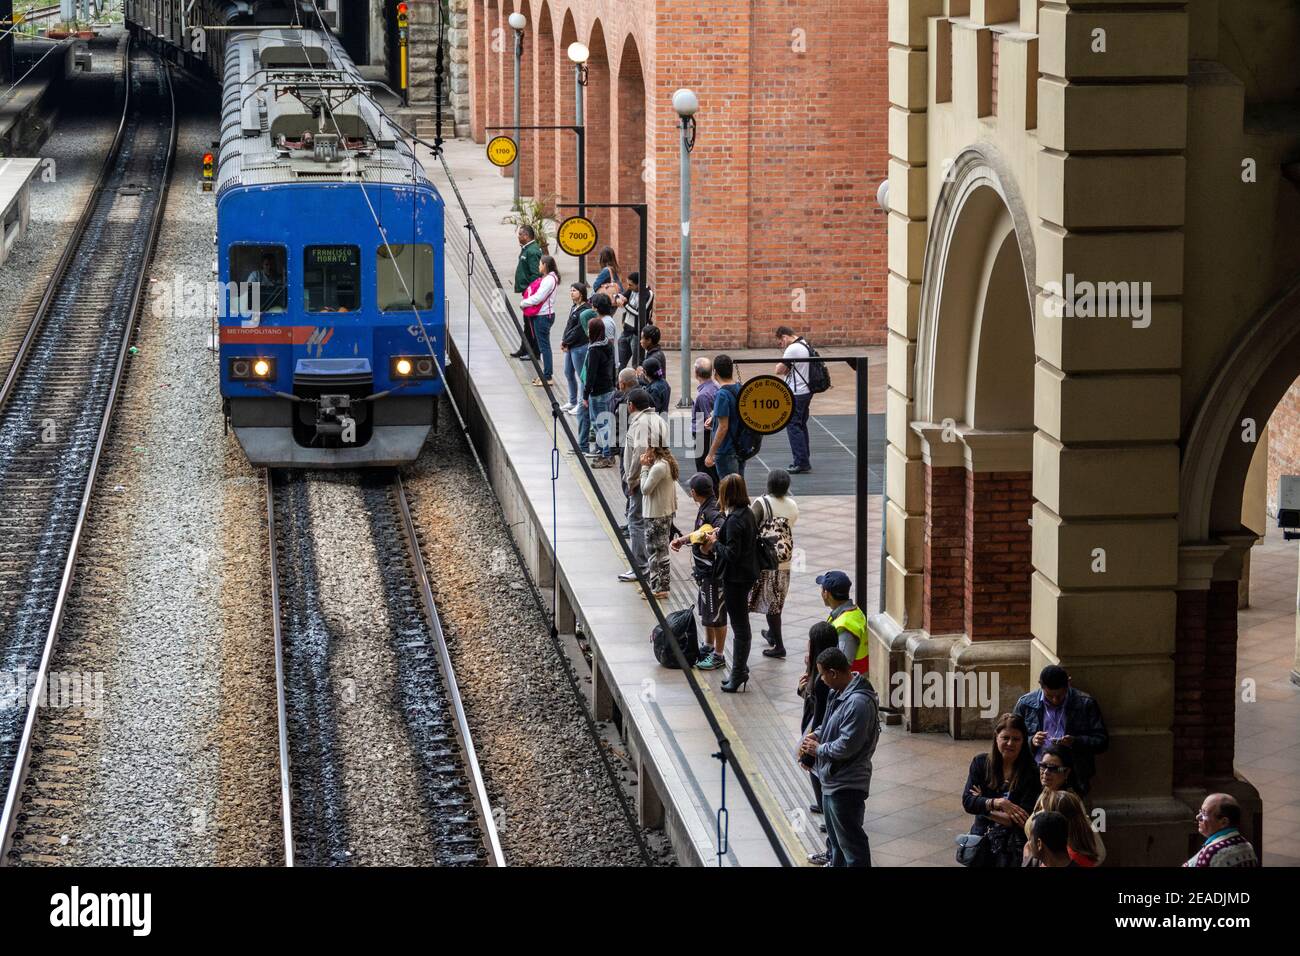 A Metropolitan line train arrives at Luz mainline railway station, a commuter and intercity station in Sao Paulo, Brazil.  Luz station was designed Stock Photo